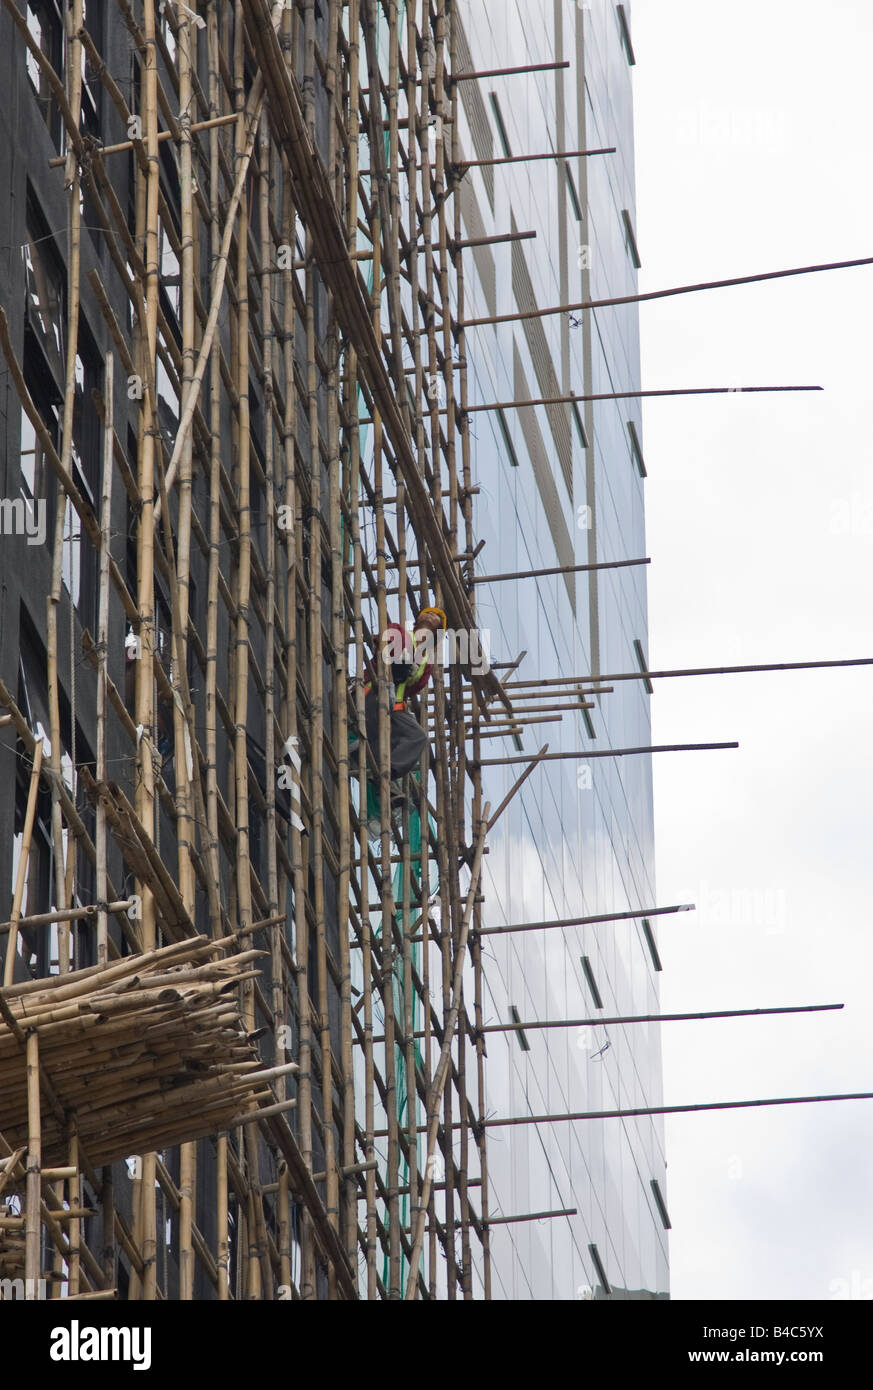 Construction worker leaning out from bamboo scaffold, Central, Hong Kong Stock Photo